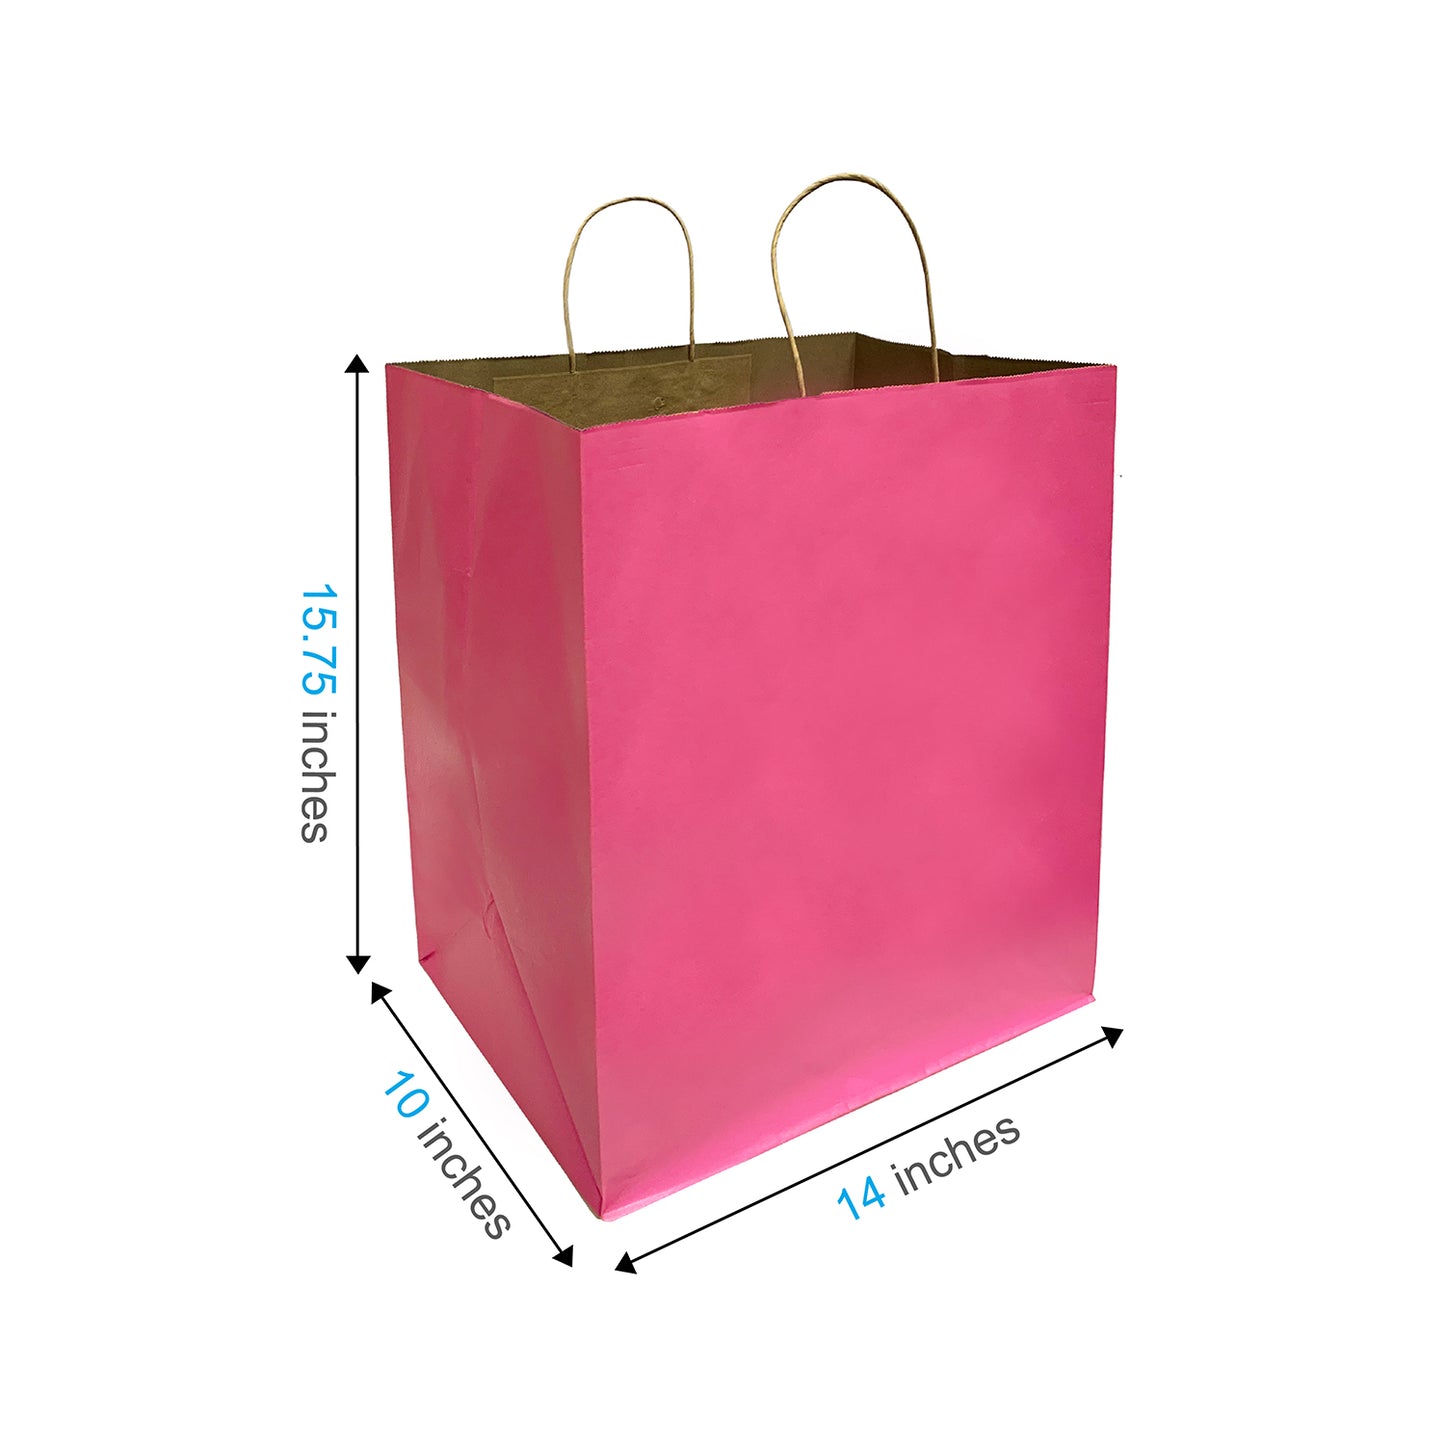 150 Pcs, Super Royal, 14x10x15.75 inches, Pink Kraft Paper Bags, with Twisted Handle